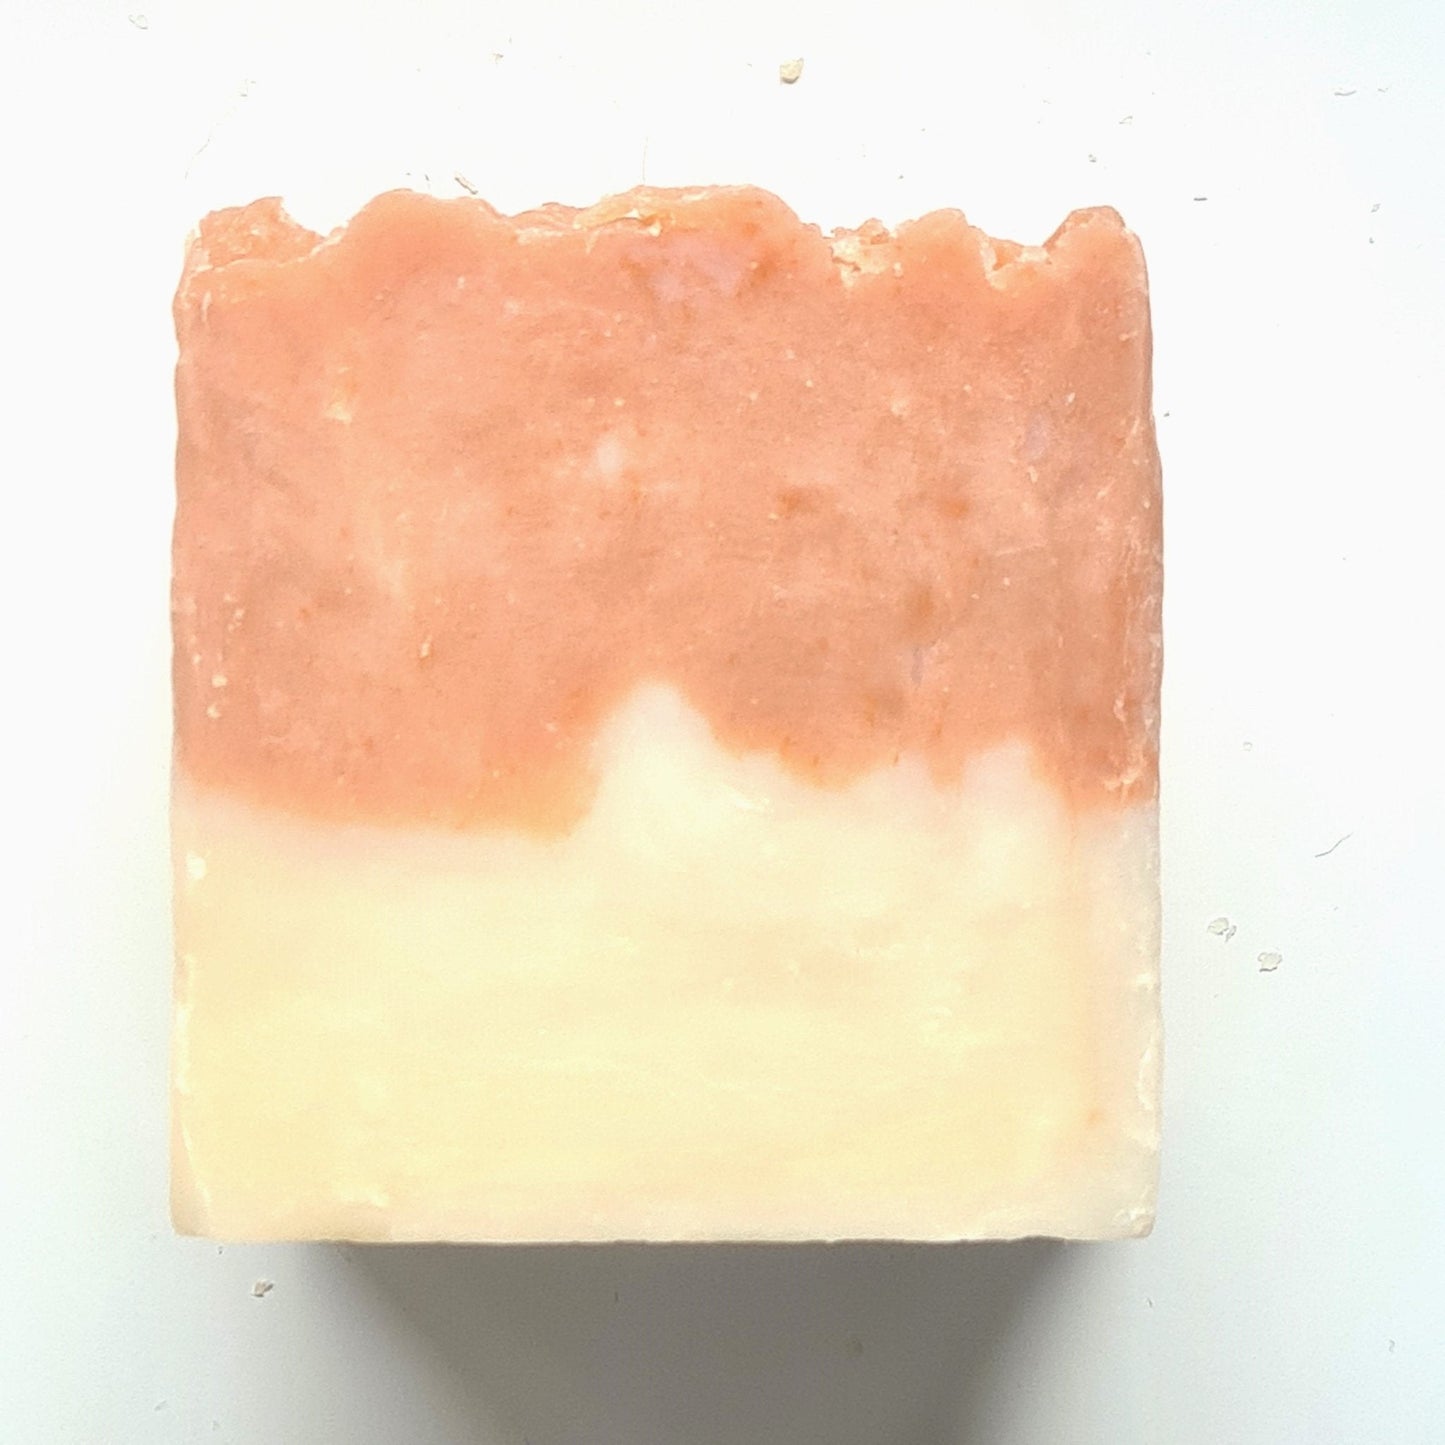 Soap - Lavender, Rose, Geranium and Patchouli Pink Clay Soap - Dees Shed